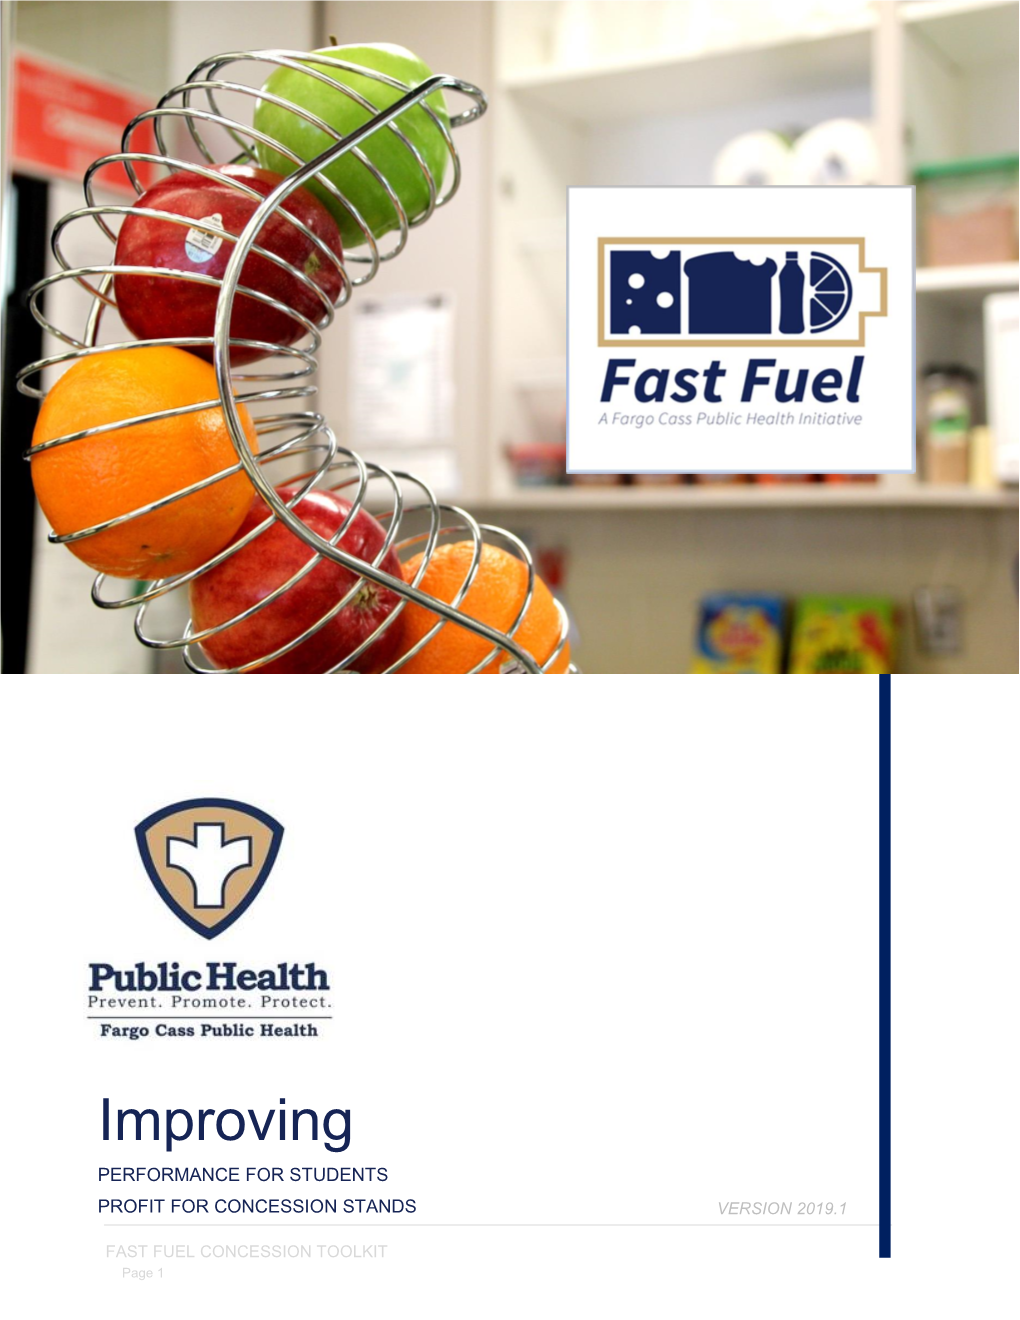 Fast Fuel Toolkit Uses Smart Snack Guidelines to Code Calories Are the Amount of Food Items As Green, Yellow Or Red with Green Being the Energy in One Serving